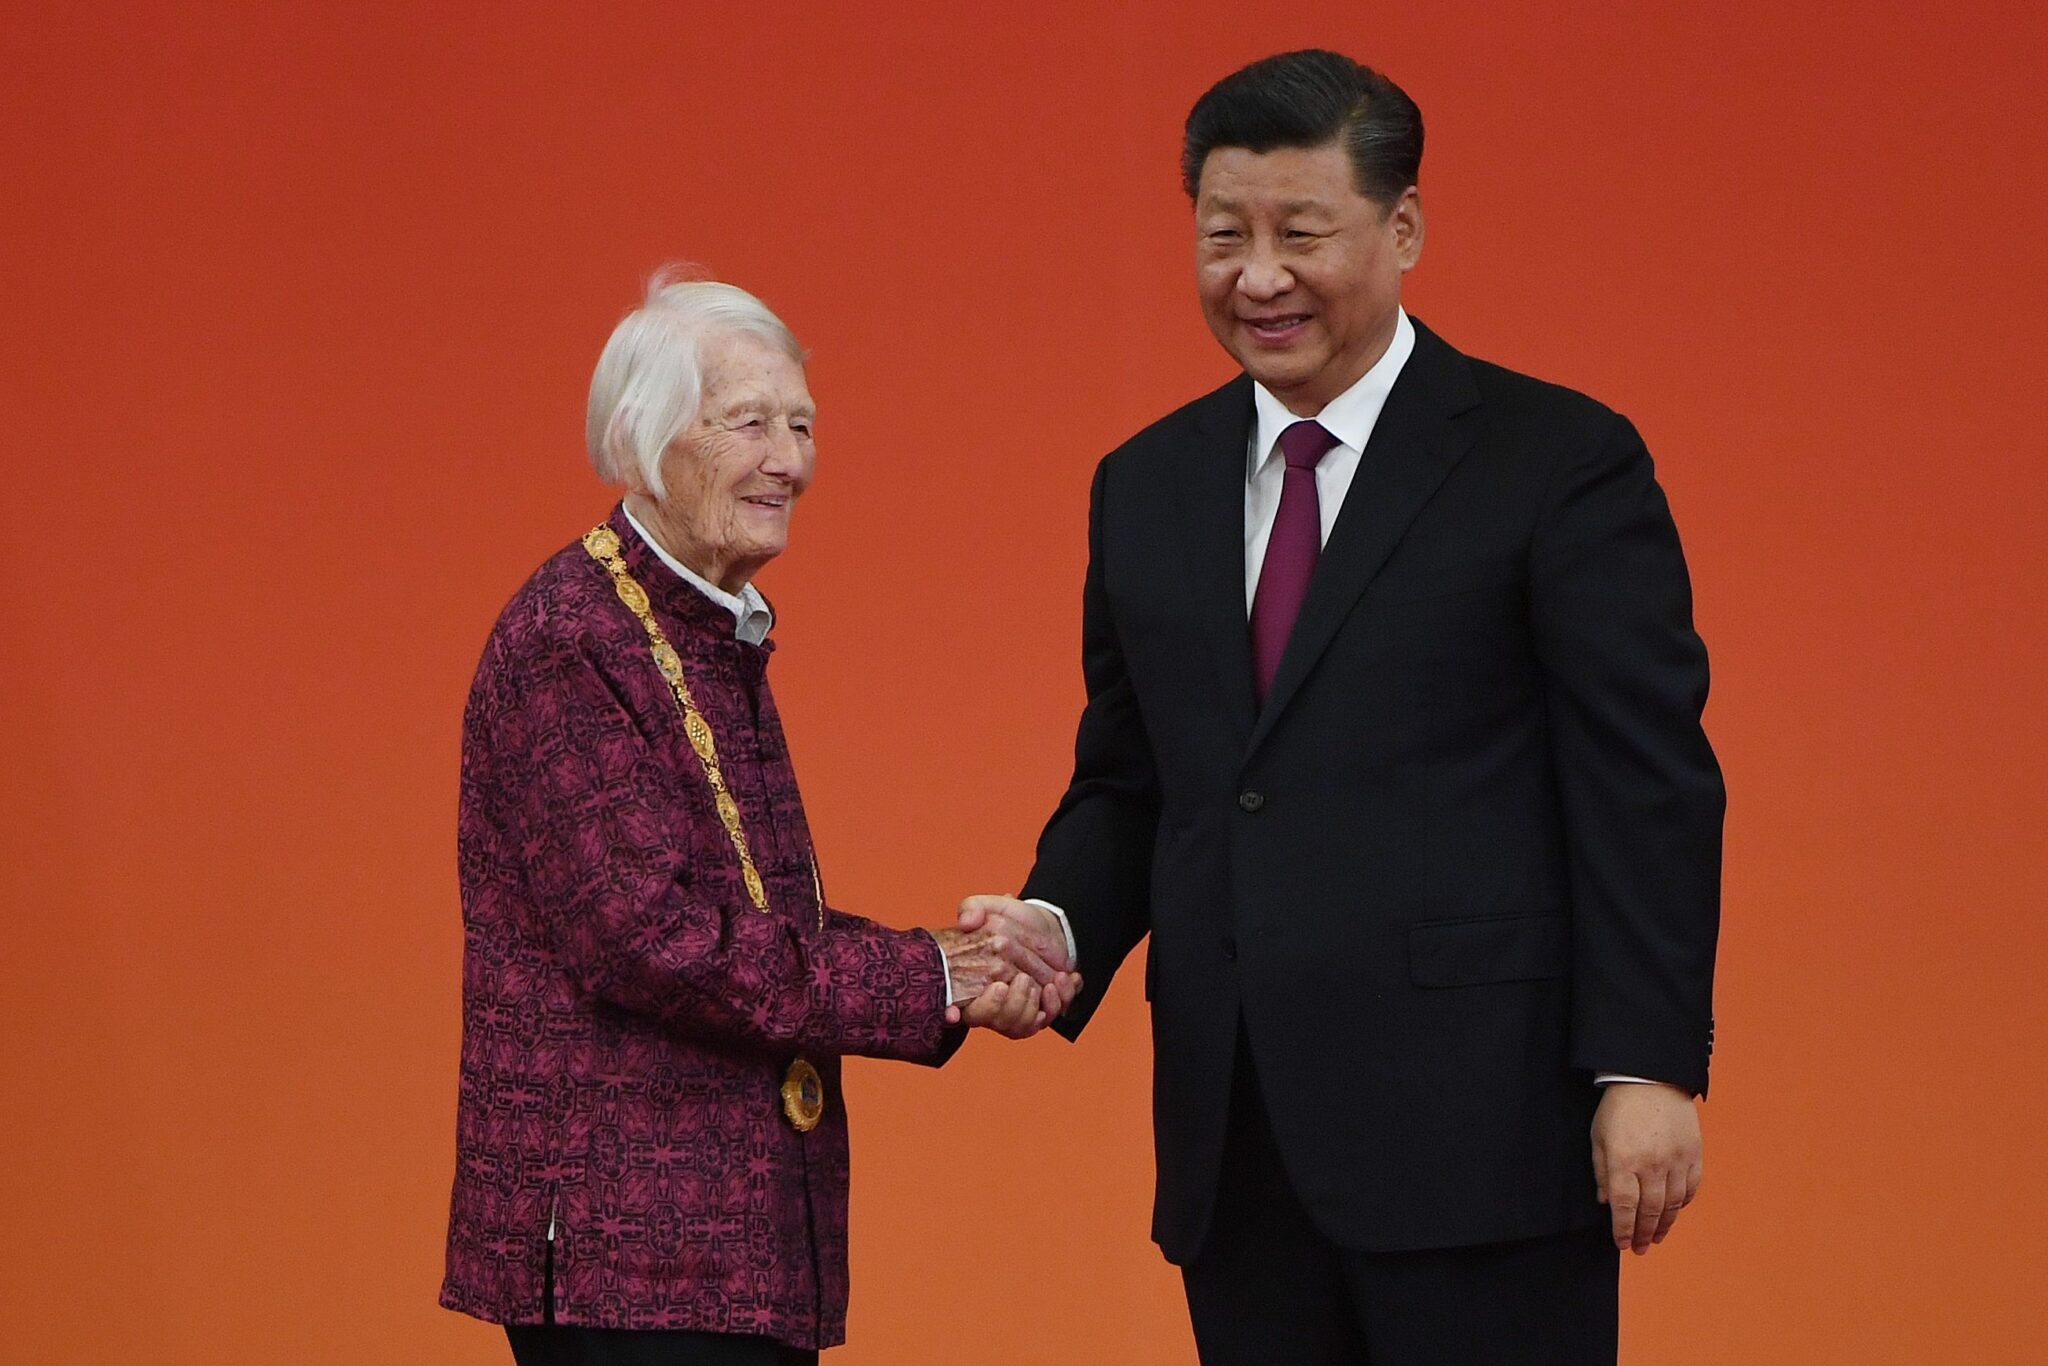 Isabel Crook (left) and President Xi Jinping (right). Photo: File photo.